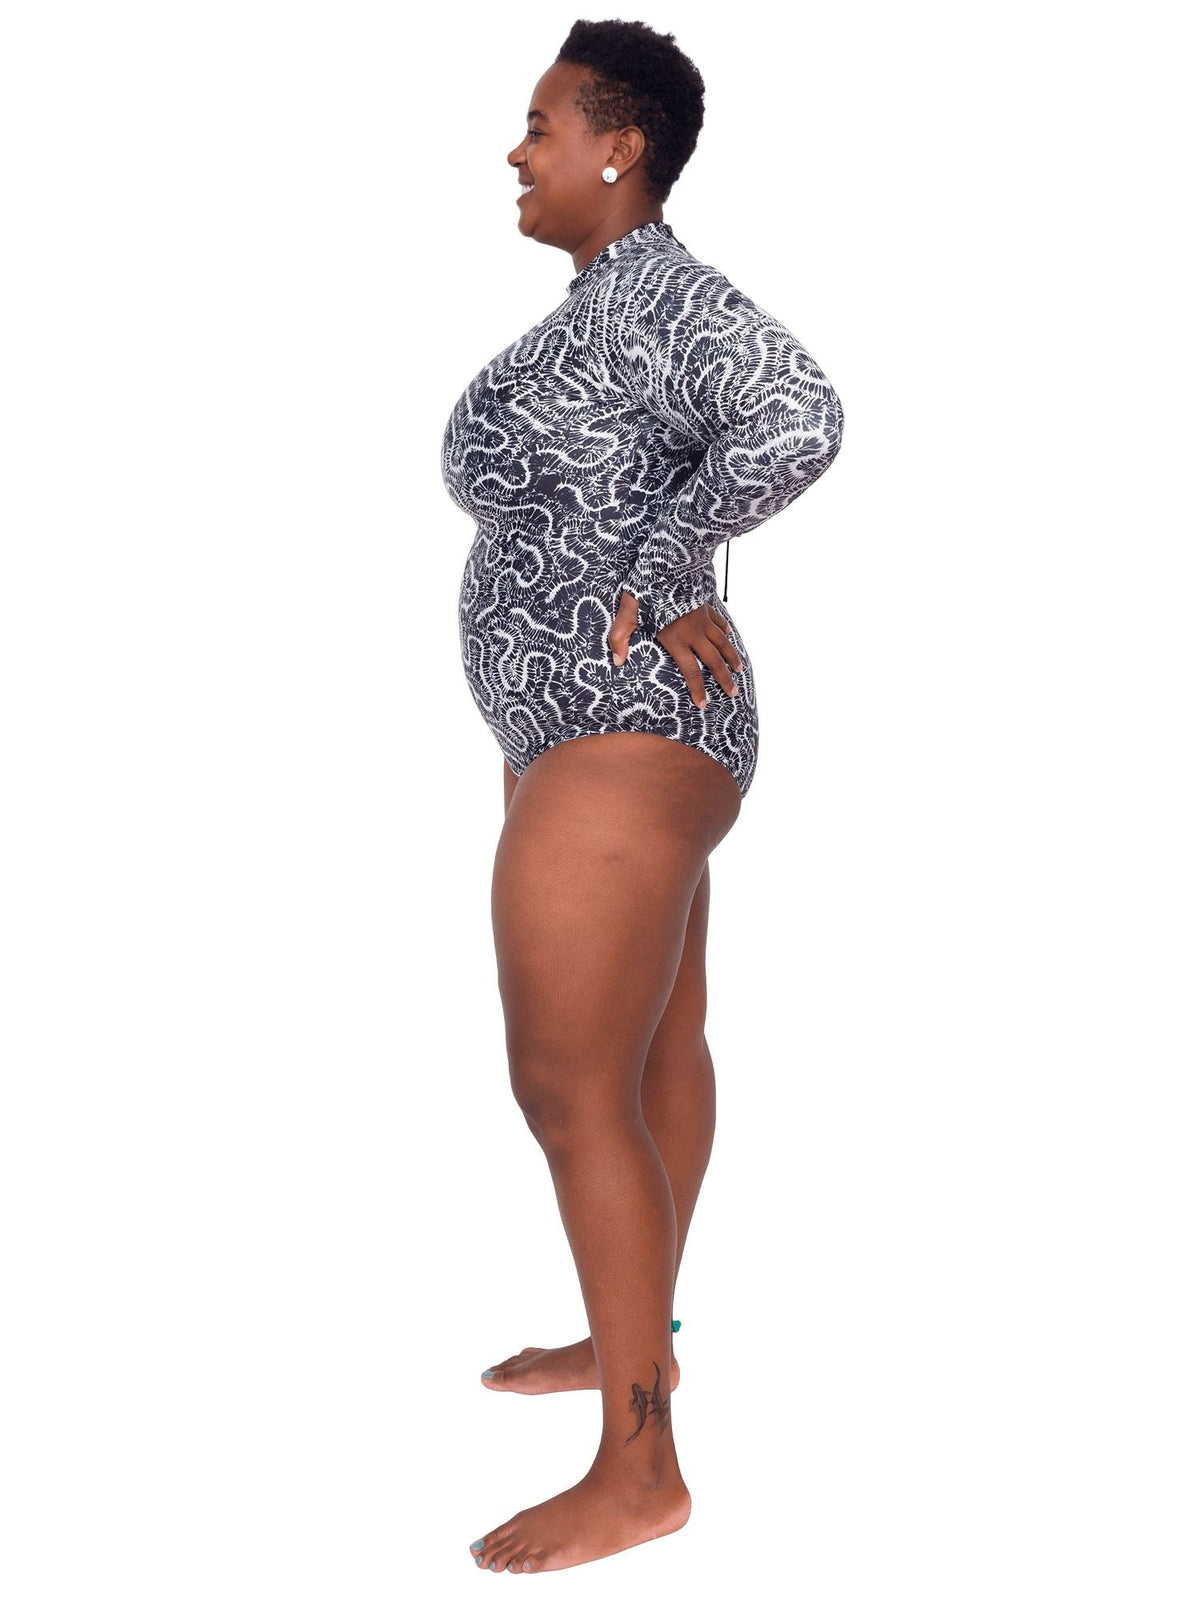 Model: Candace is a PhD candidate in the Predator Ecology &amp; Conservation Lab at FIU and the first Bahamian scientist dedicated specifically to shark research. She is 5&#39;9&quot;, 230 lbs, and is wearing a 2XL Sun Suit.